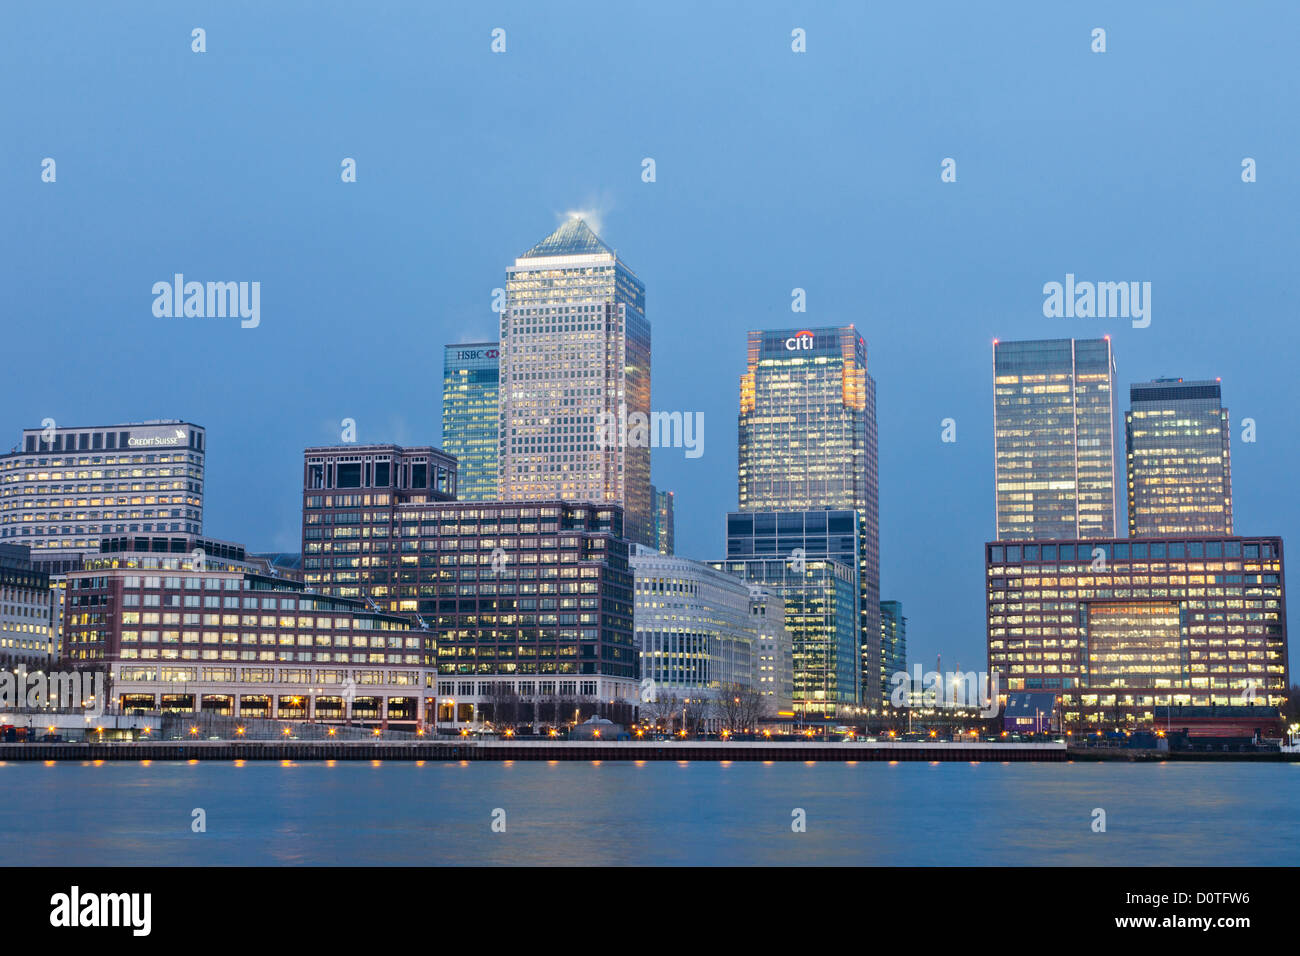 UK, United Kingdom, Great Britain, Britain, England, London, Docklands, Canary Wharf, Skyscrapers, Office Block, Business, Comme Stock Photo